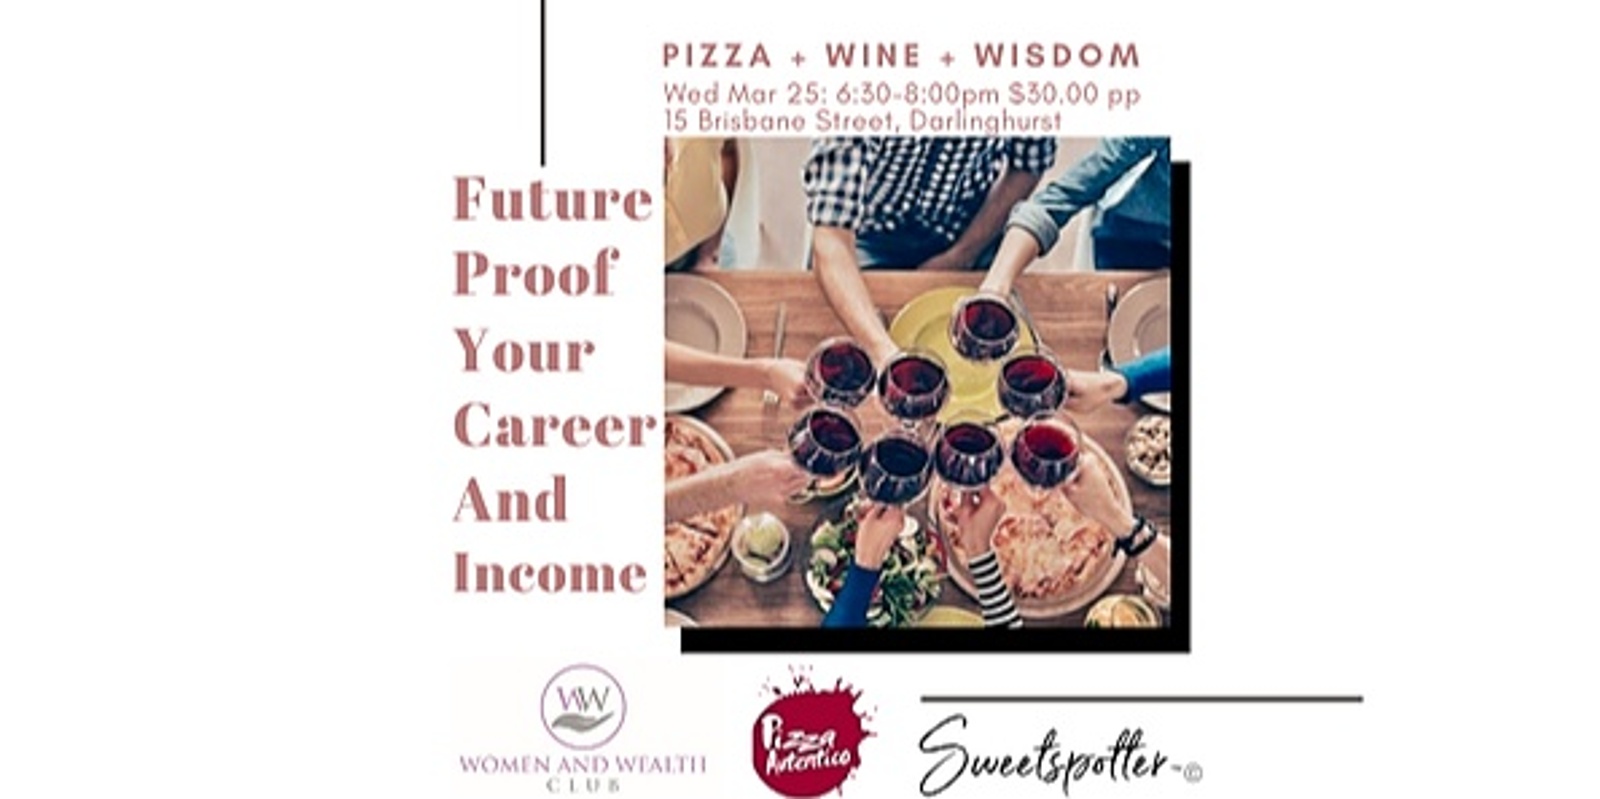 Banner image for Future Proof your career and income - Pizza + Wine + Wisdom